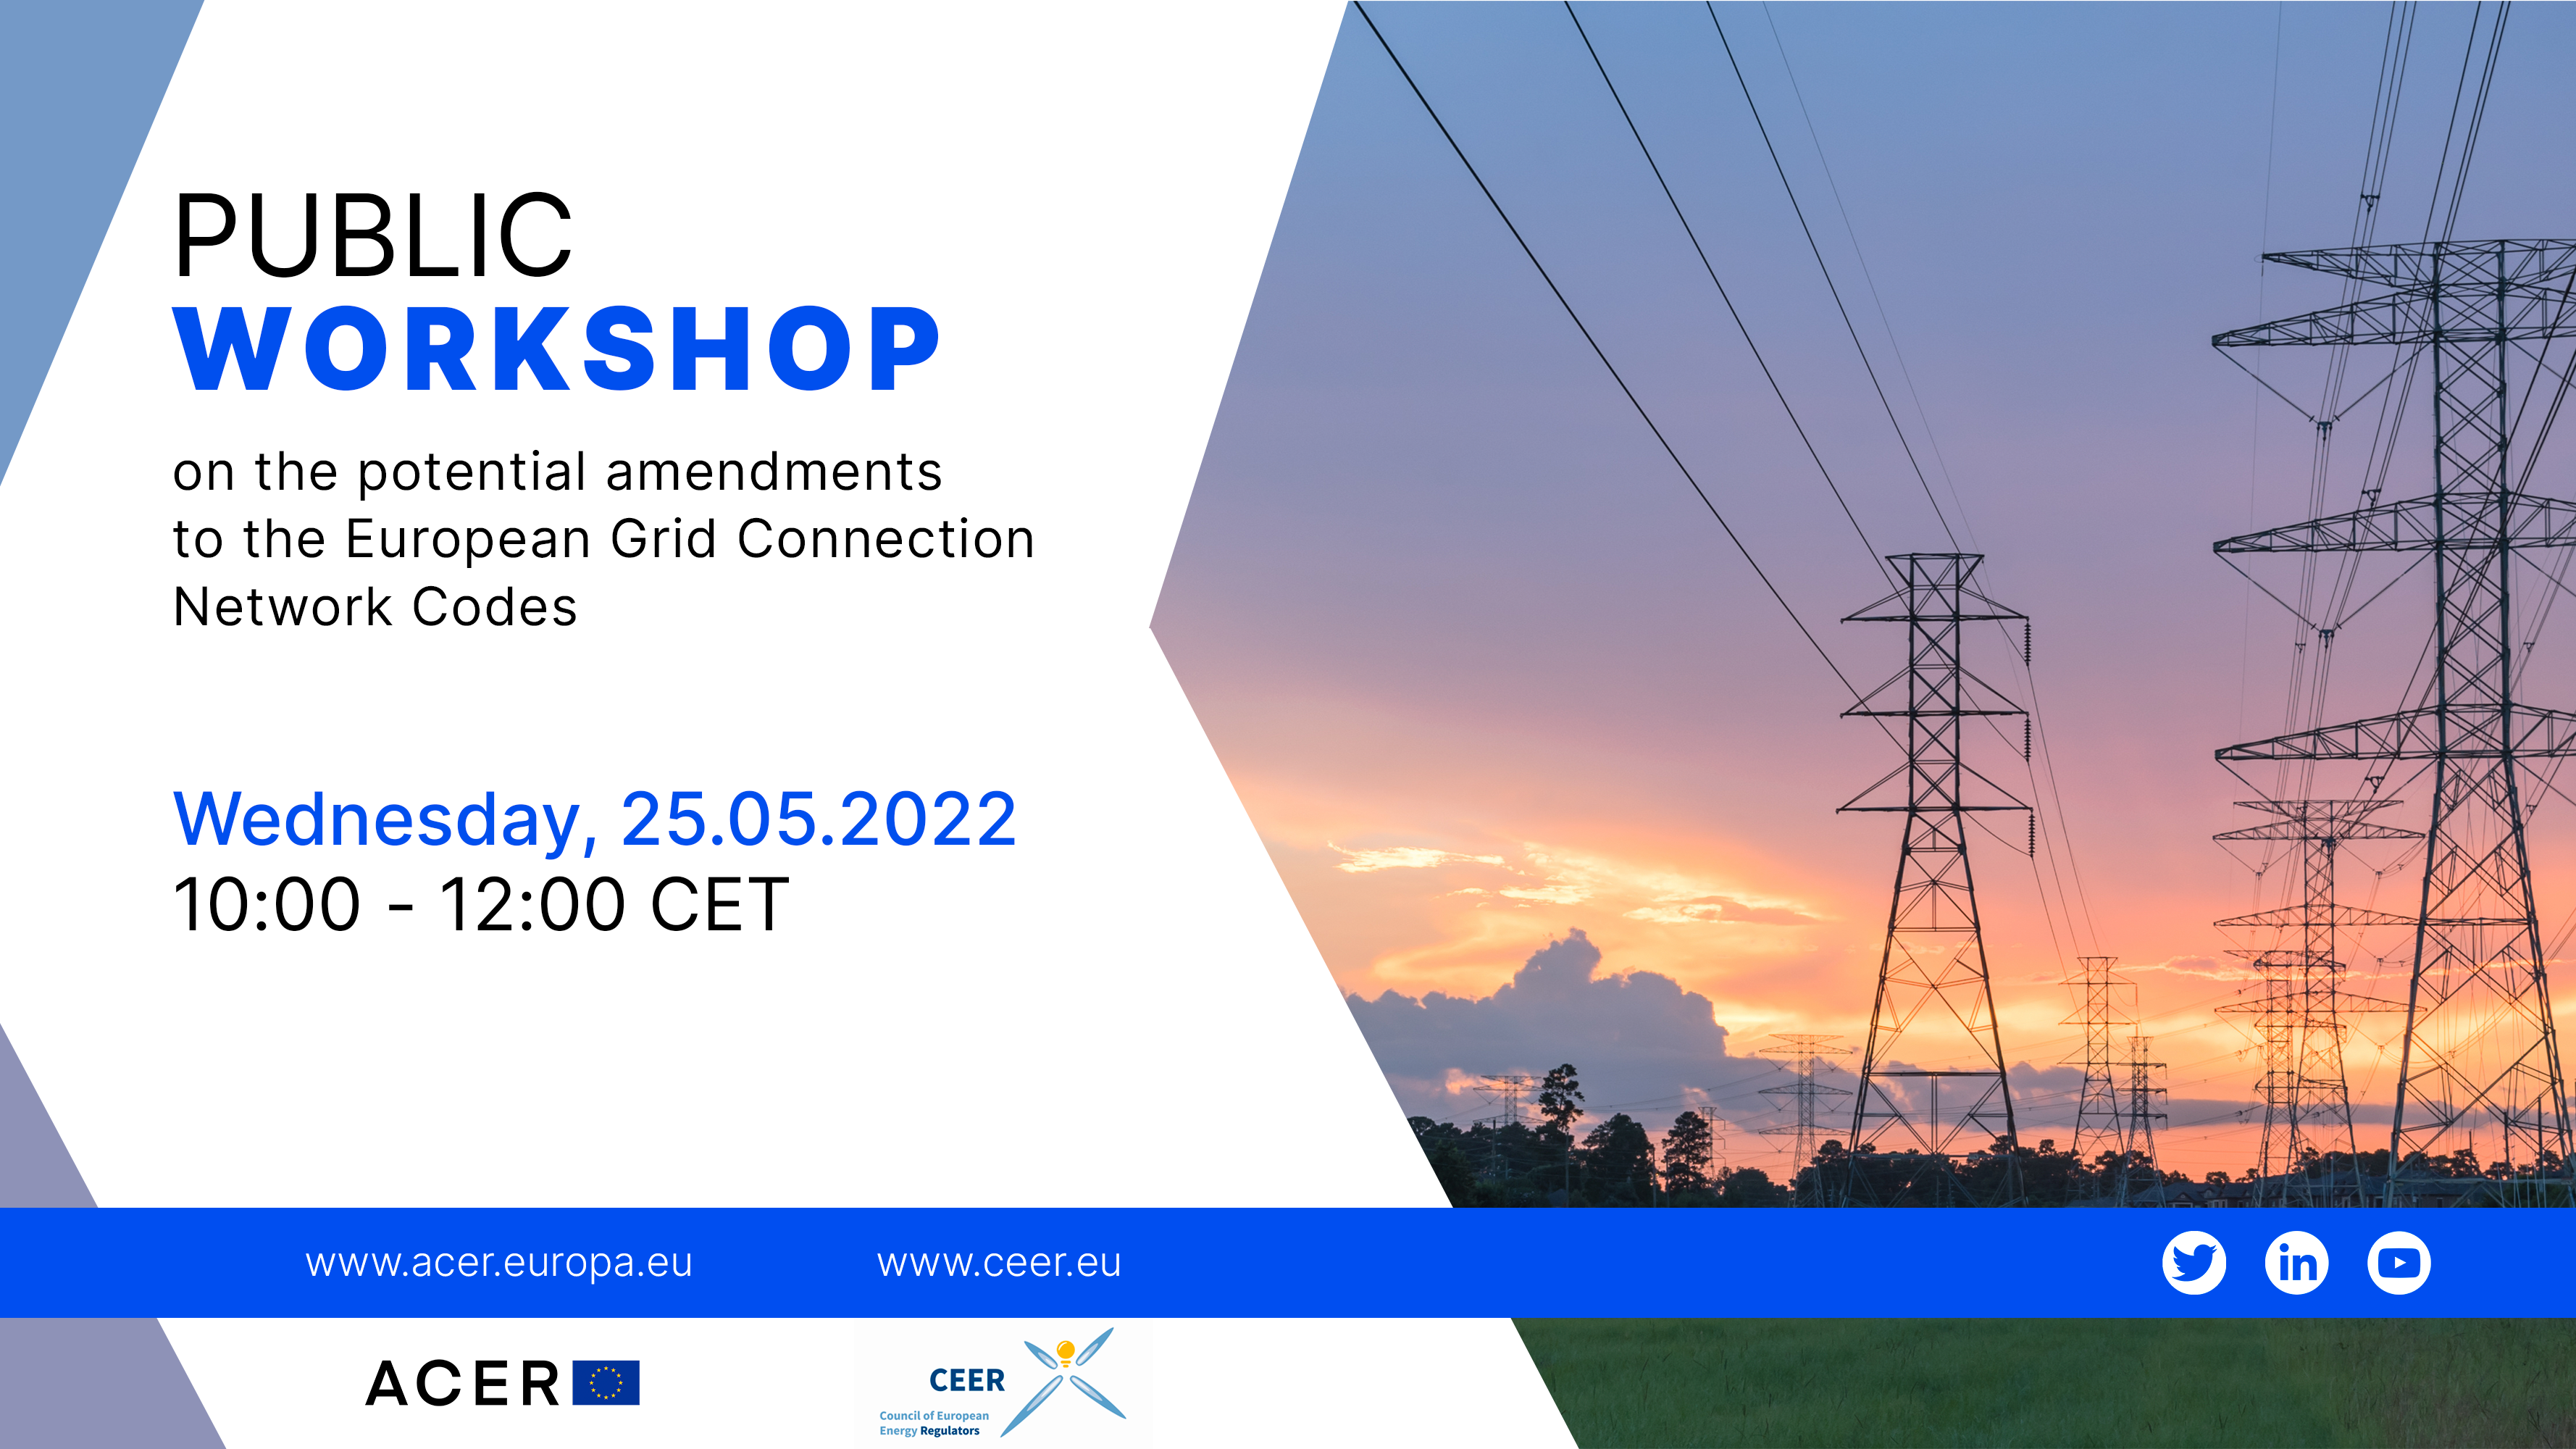 ACER-CEER Public Workshop on the potential amendments to the European Grid Connection Network Codes